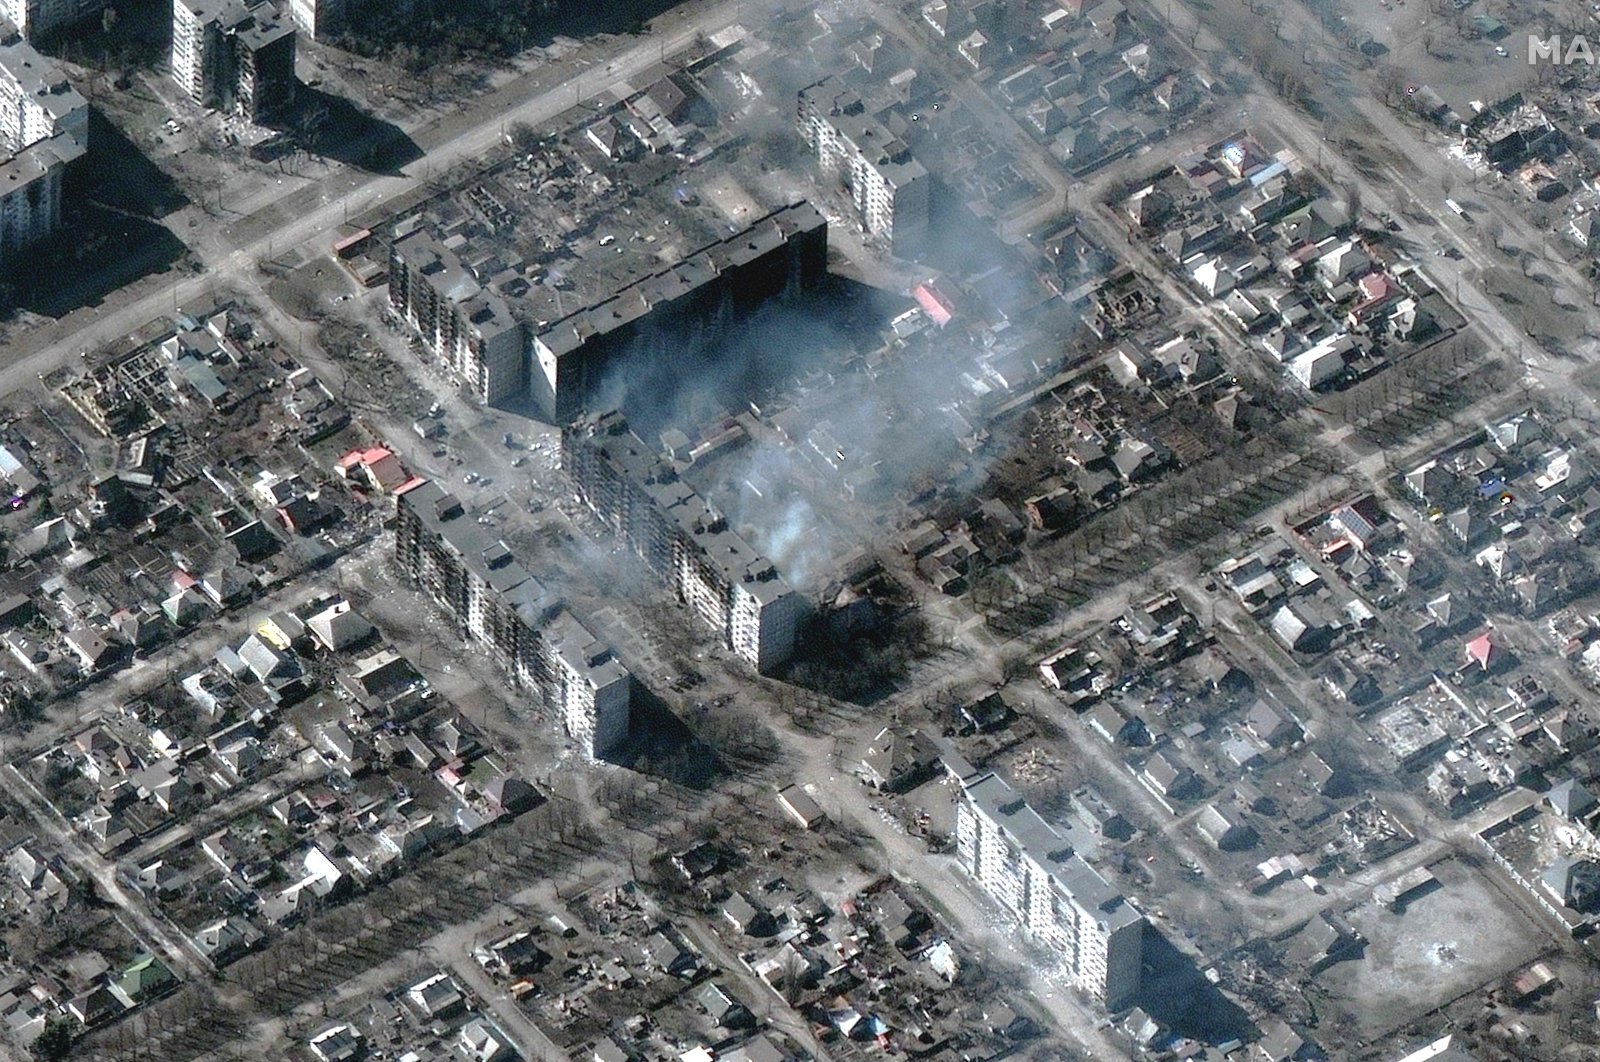 Burning and destroyed high-rise apartments are seen in this Maxar satellite image taken in Mariupol, Ukraine on March 22, 2022. (Maxar Technologies Satellite Image/ AFP)